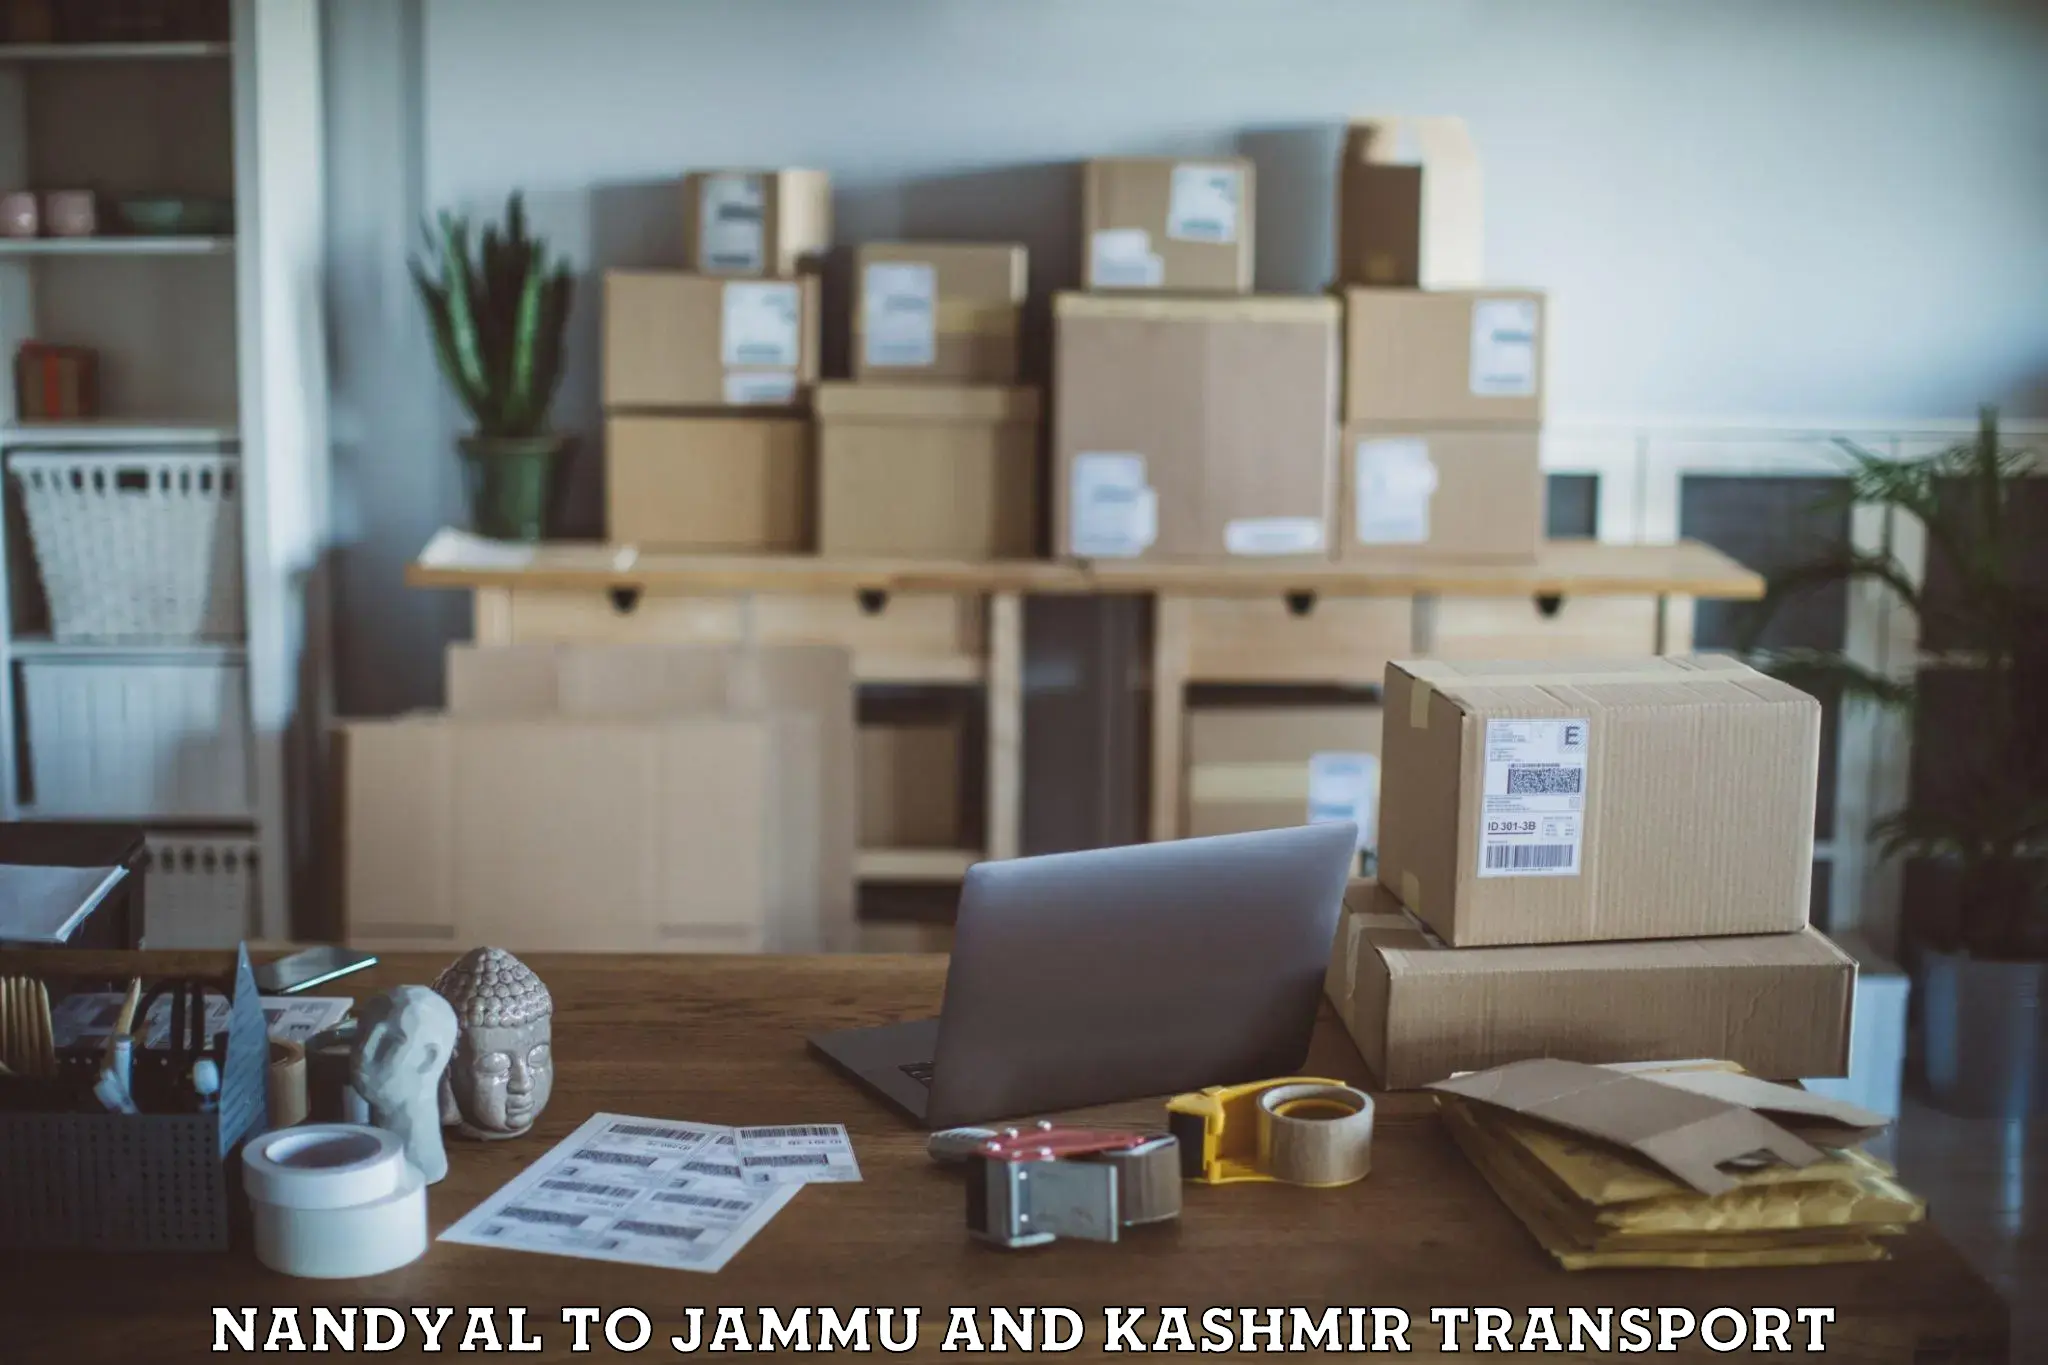 Truck transport companies in India Nandyal to Anantnag